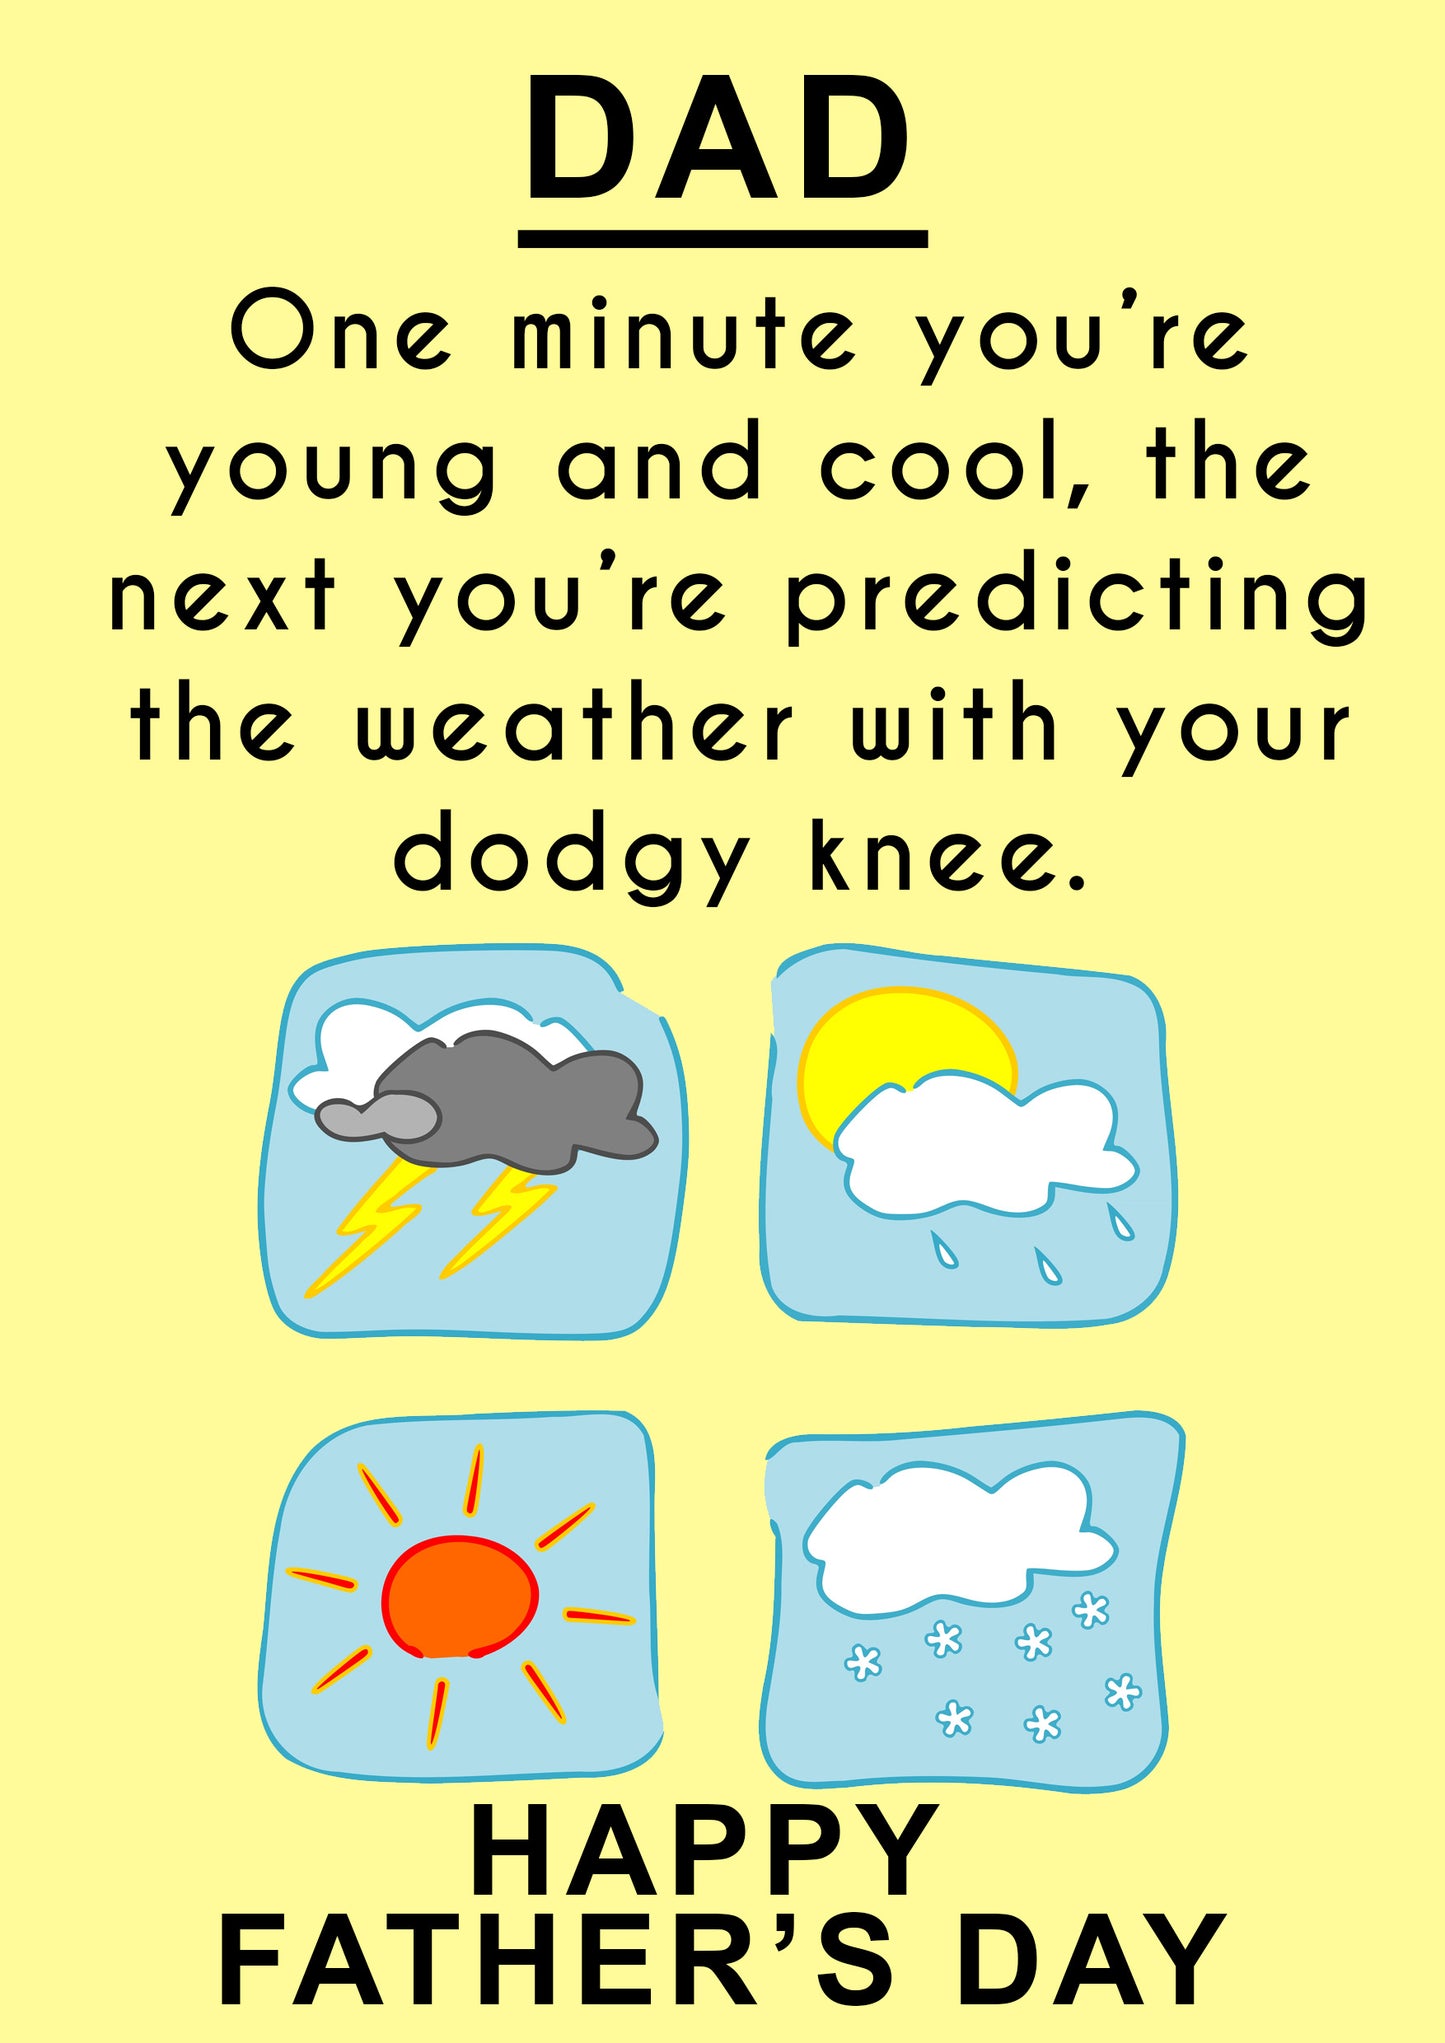 Dodgy Knee Funny Father's Day Card